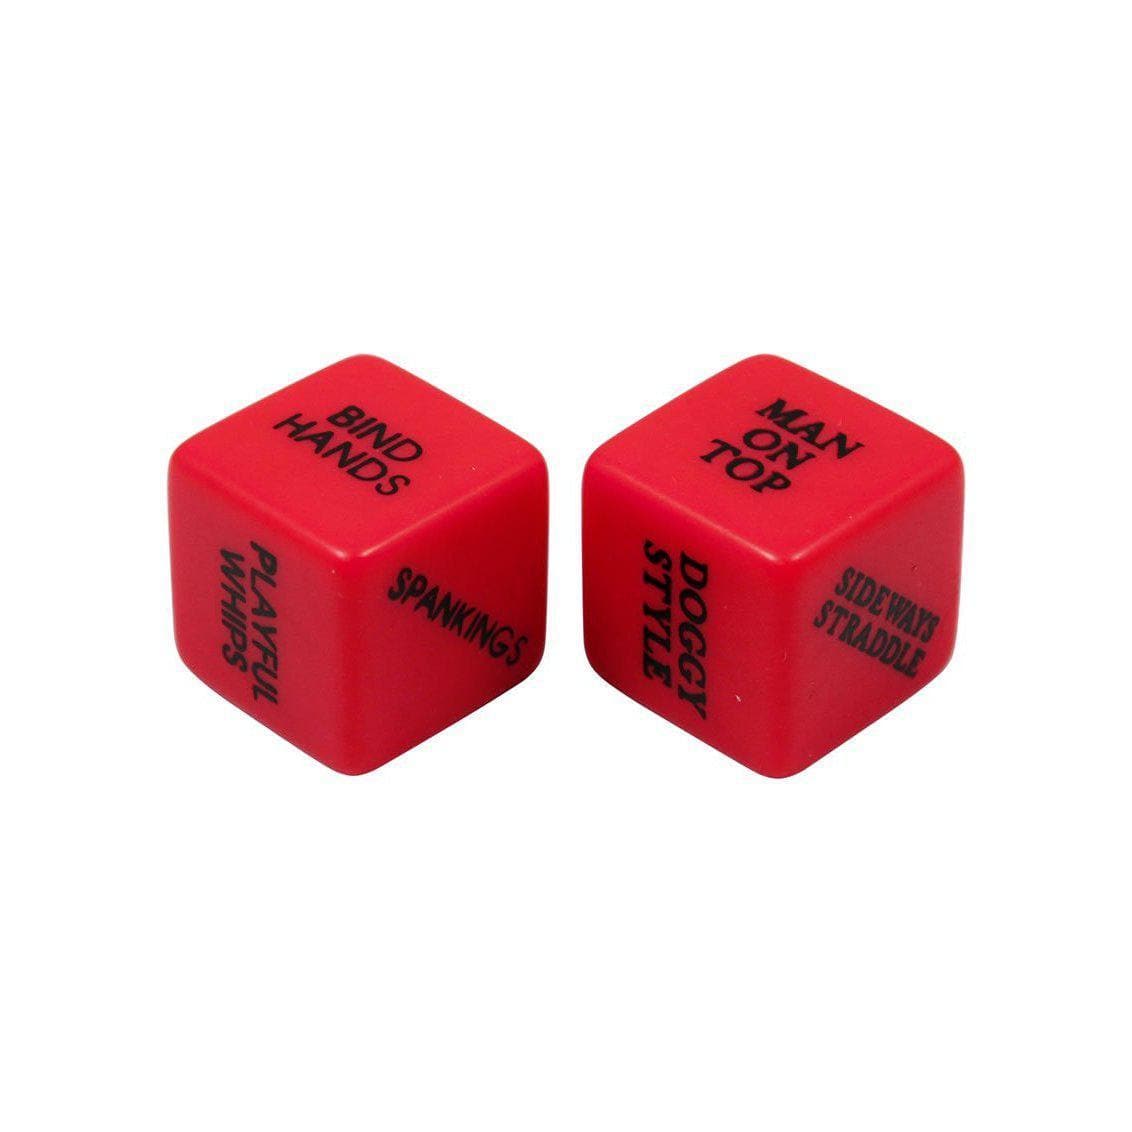 Couple's Kinky BDSM Dice Game - Romantic Blessings